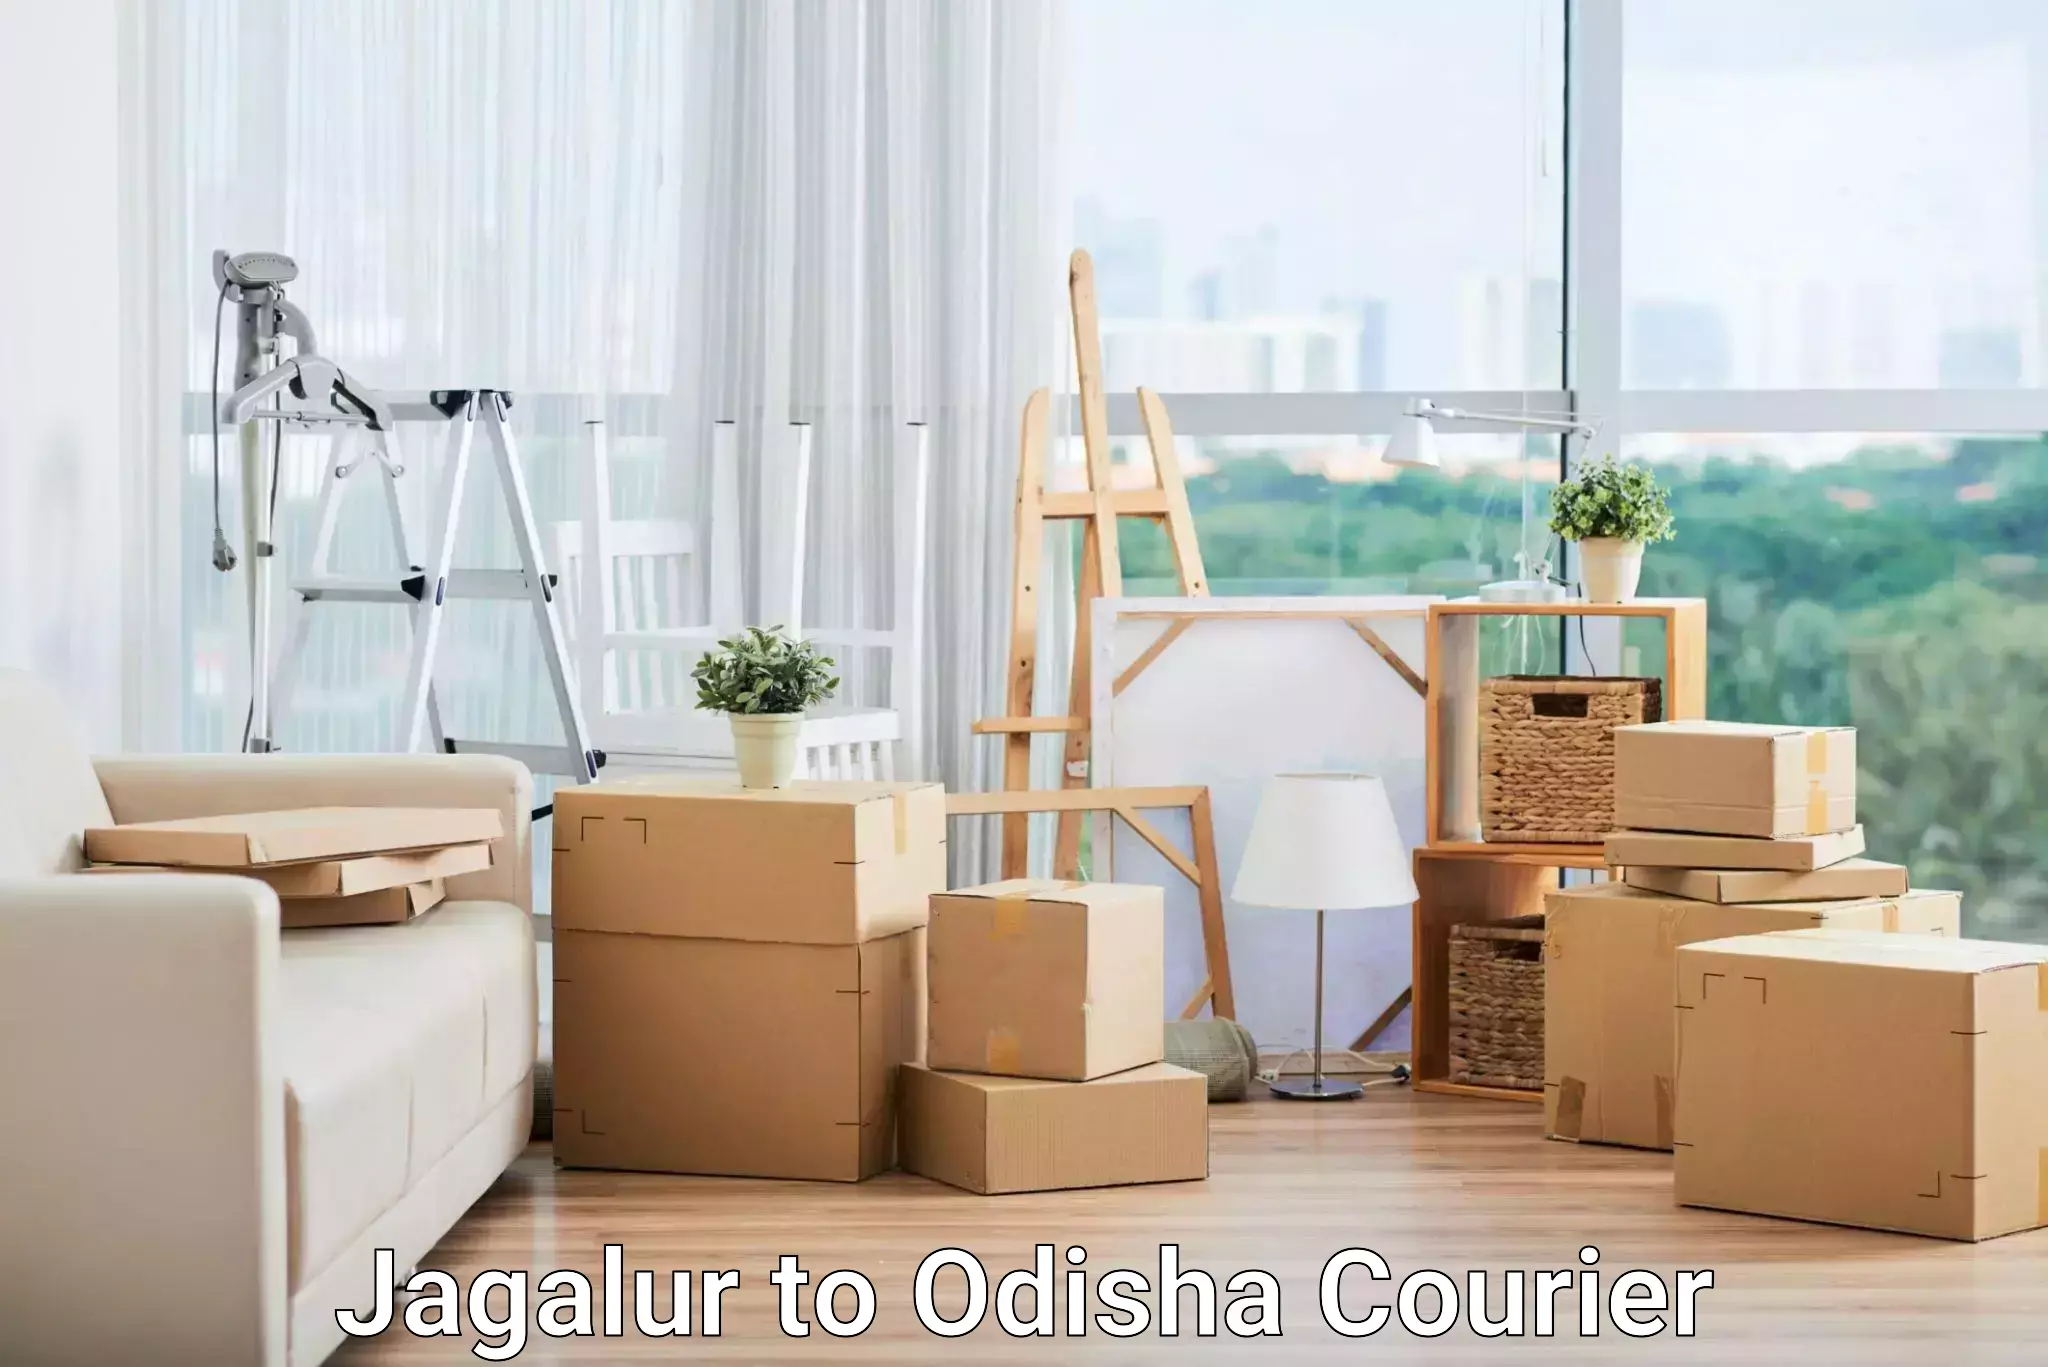 Package delivery network Jagalur to Odisha